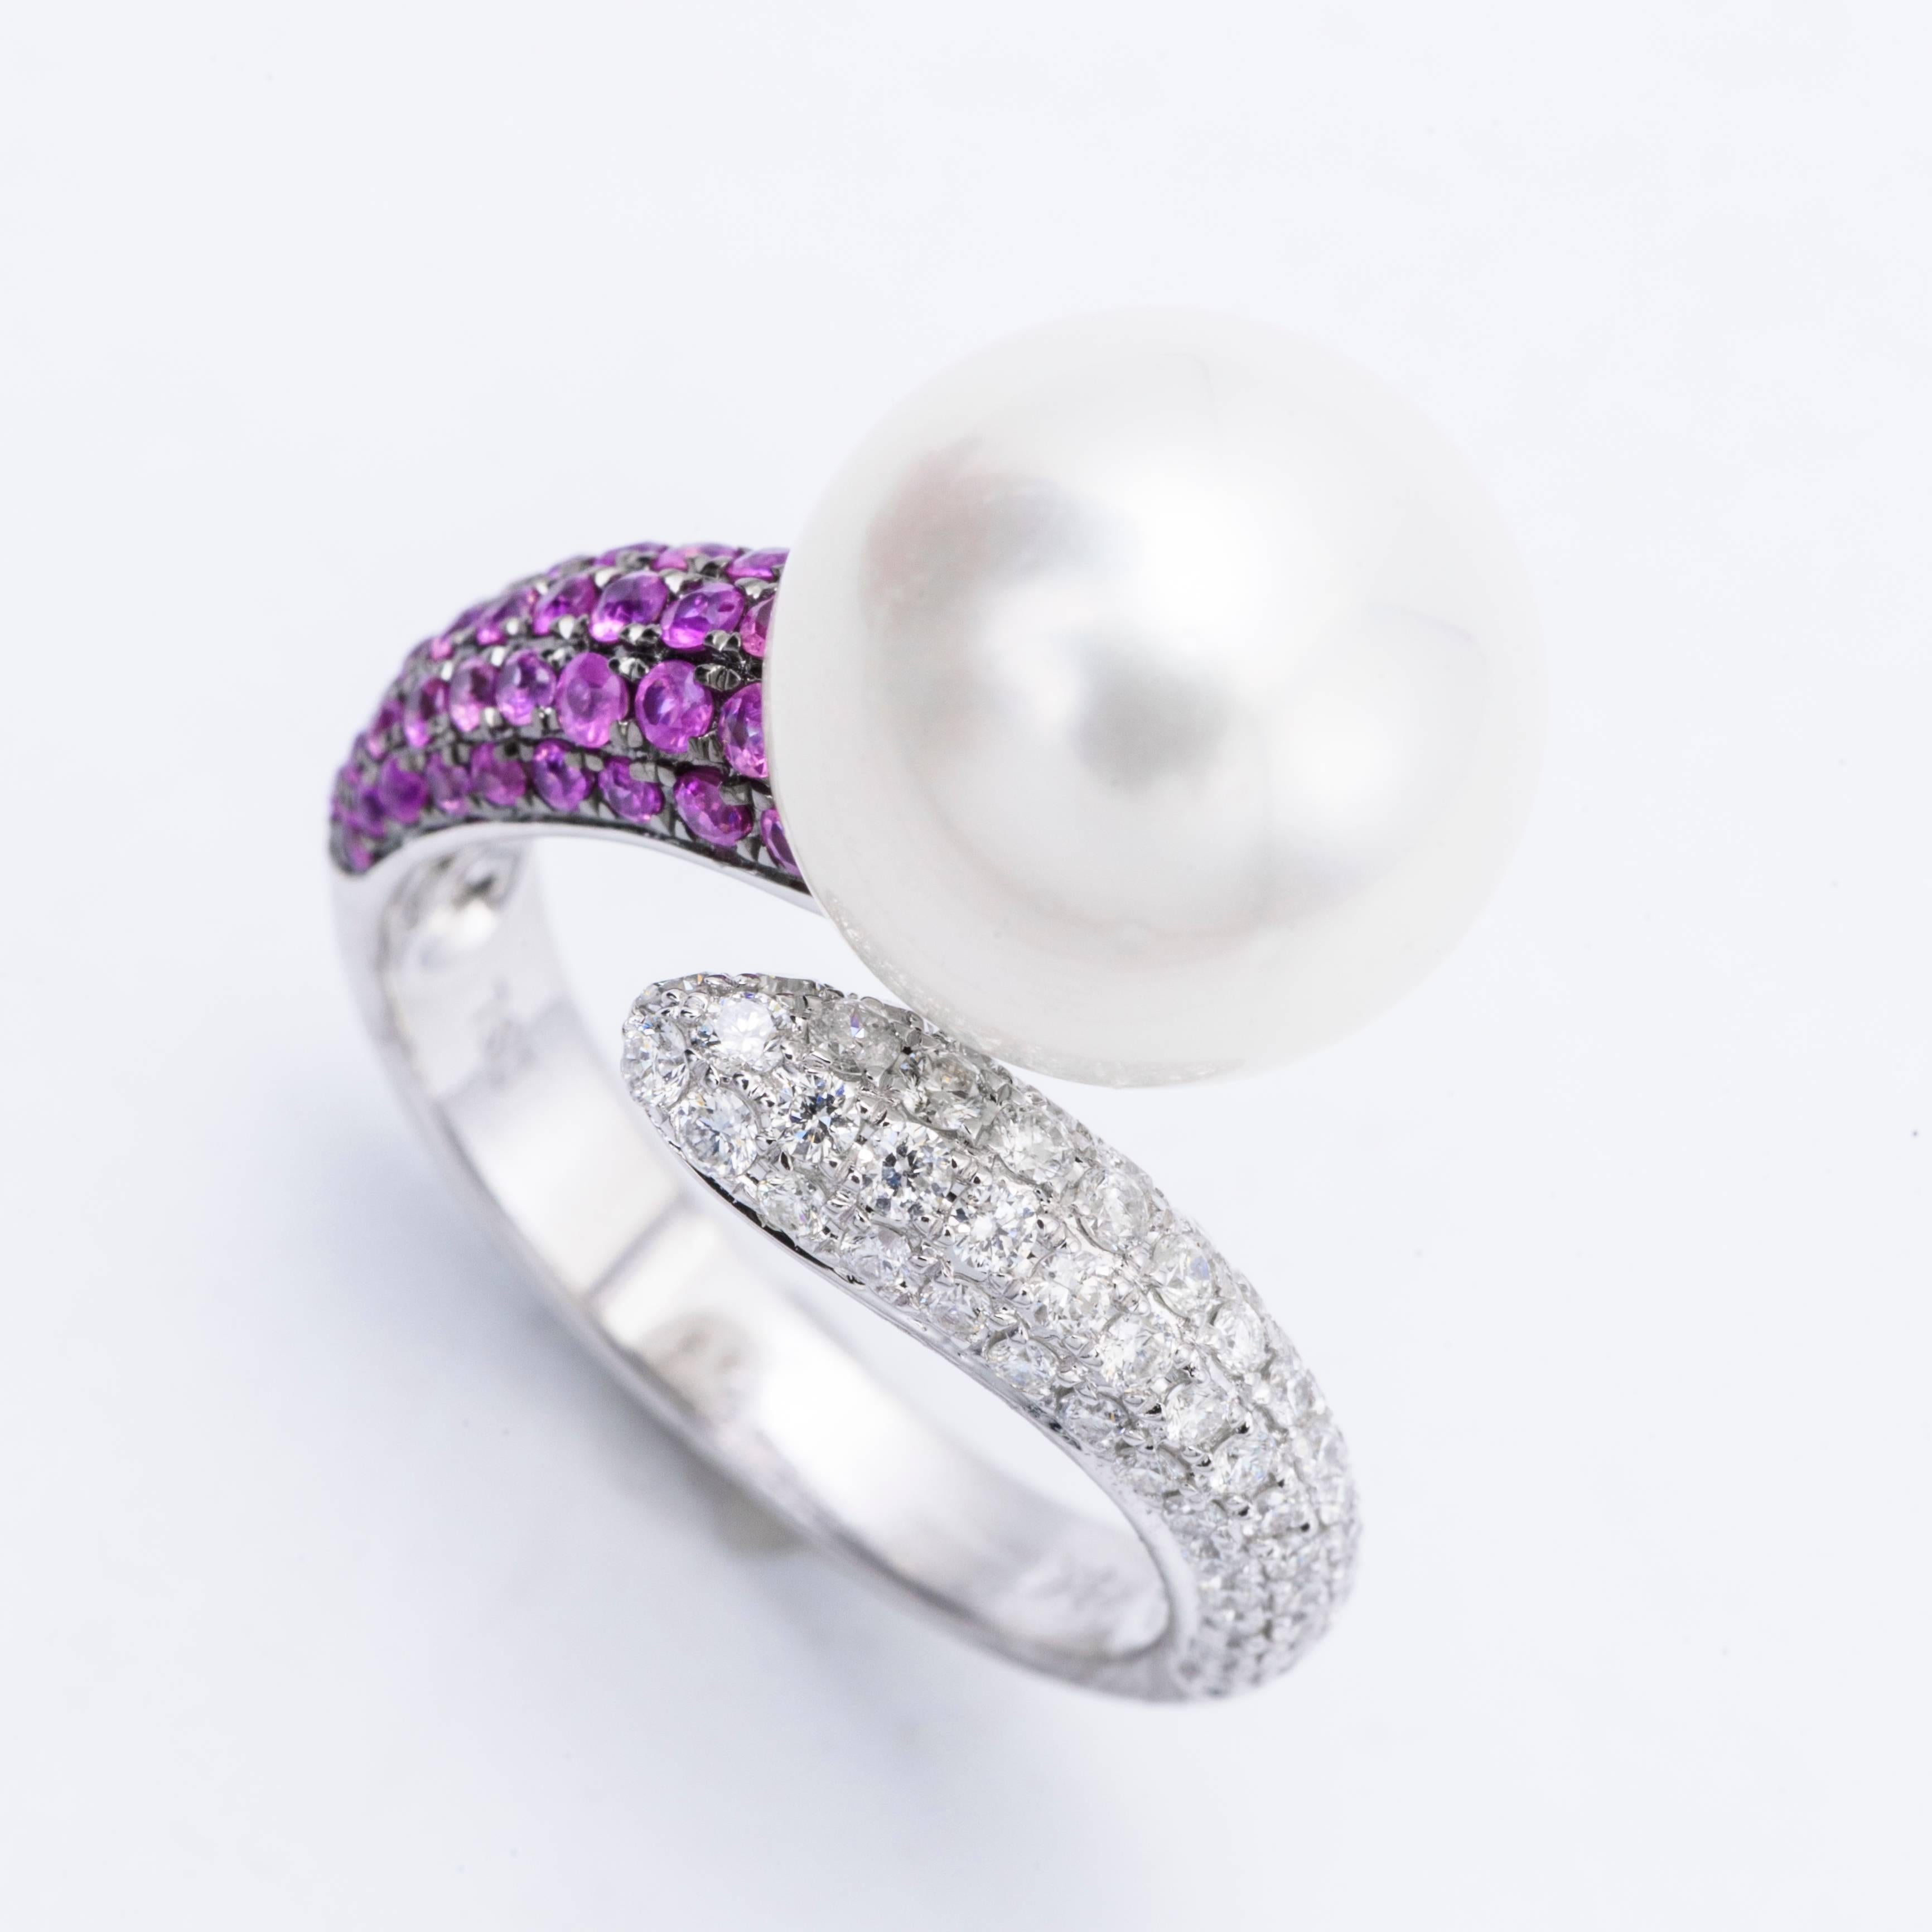 This exceptional ring features: 18K White gold
Pink Sapphire weight: 0.48 Carats
Diamonds Weight:: 0.46 Carats
South Sea Pearl; 12-13 mm 
Ring size: 6.5 We Re size free of charge